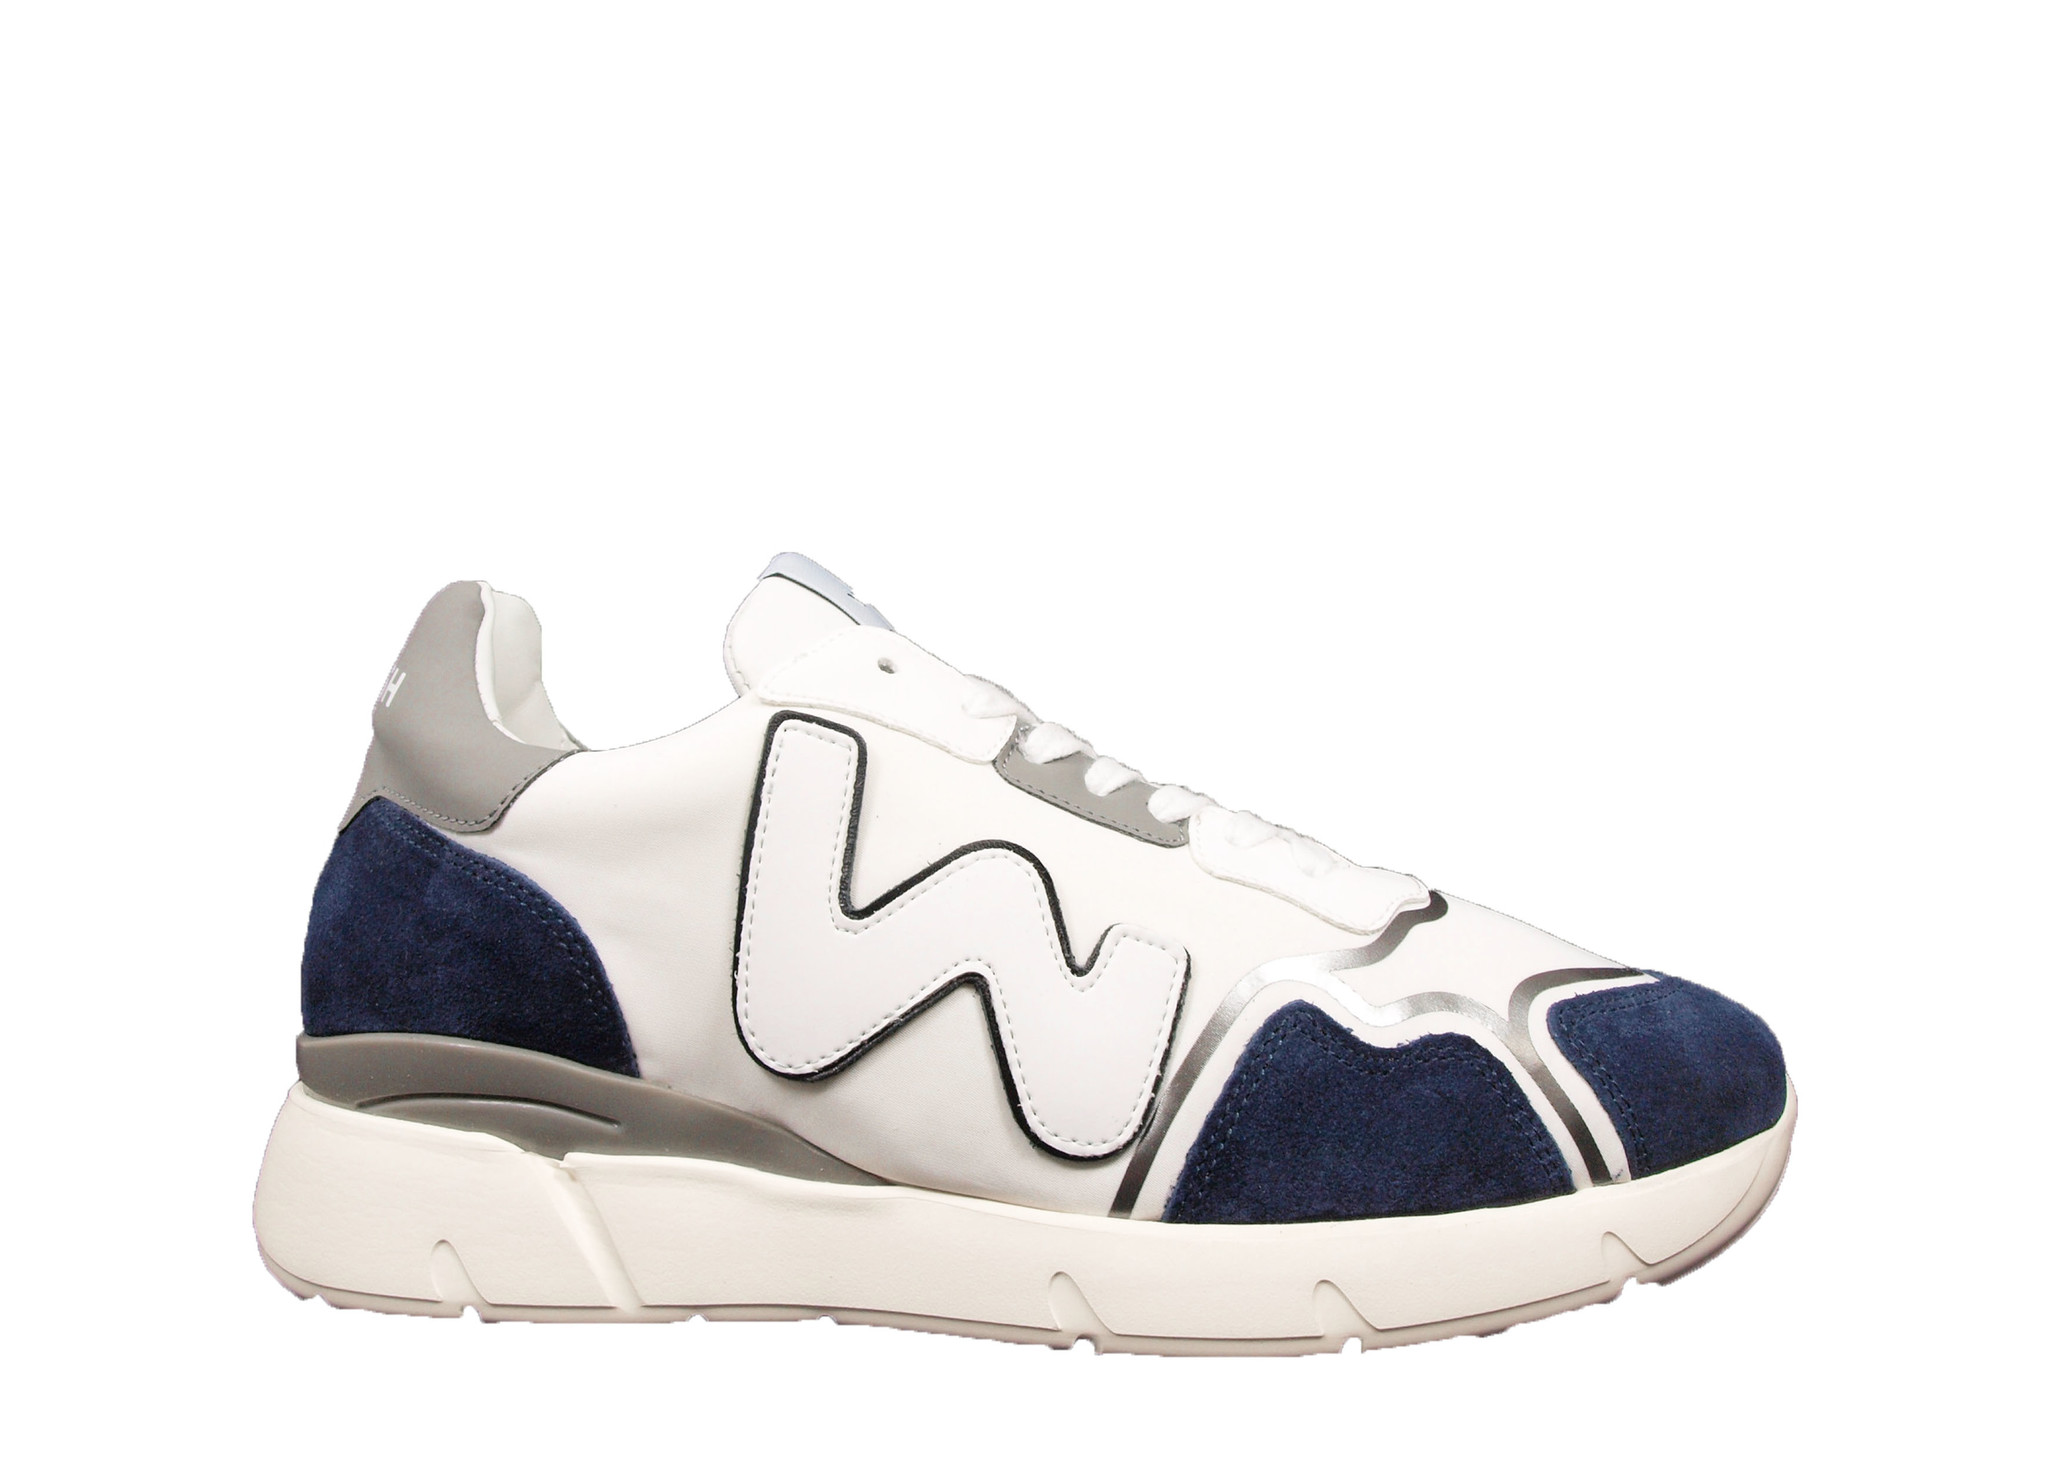 WOMSH WOMSH Sustainable Sneaker R211463 Runny Wit/Blauw